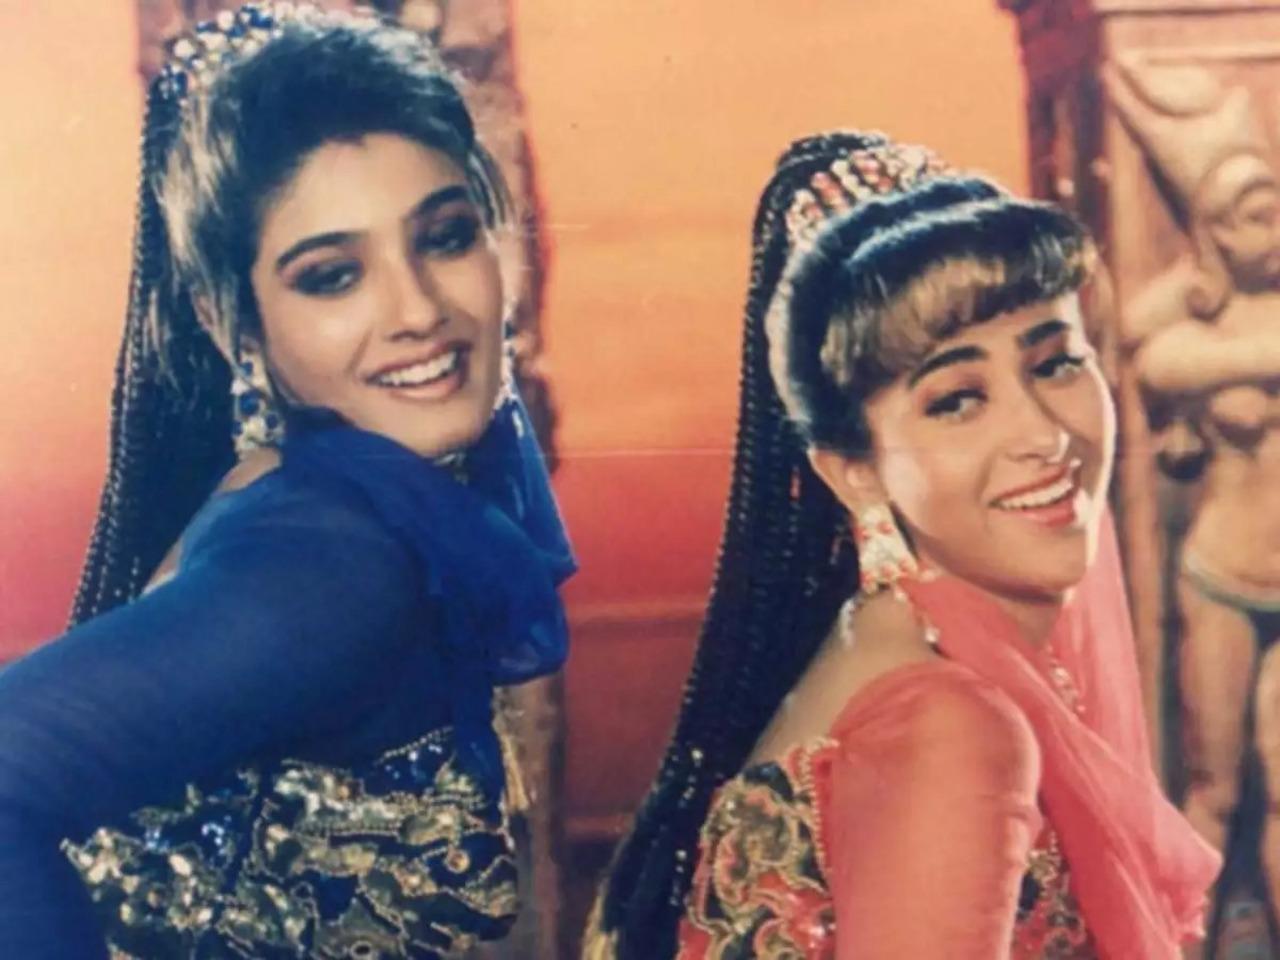 Andaz Apna Apna (1994)
Karisma and Raveena's characters as friends who would go the extra length to find the right man is an endearing friendship